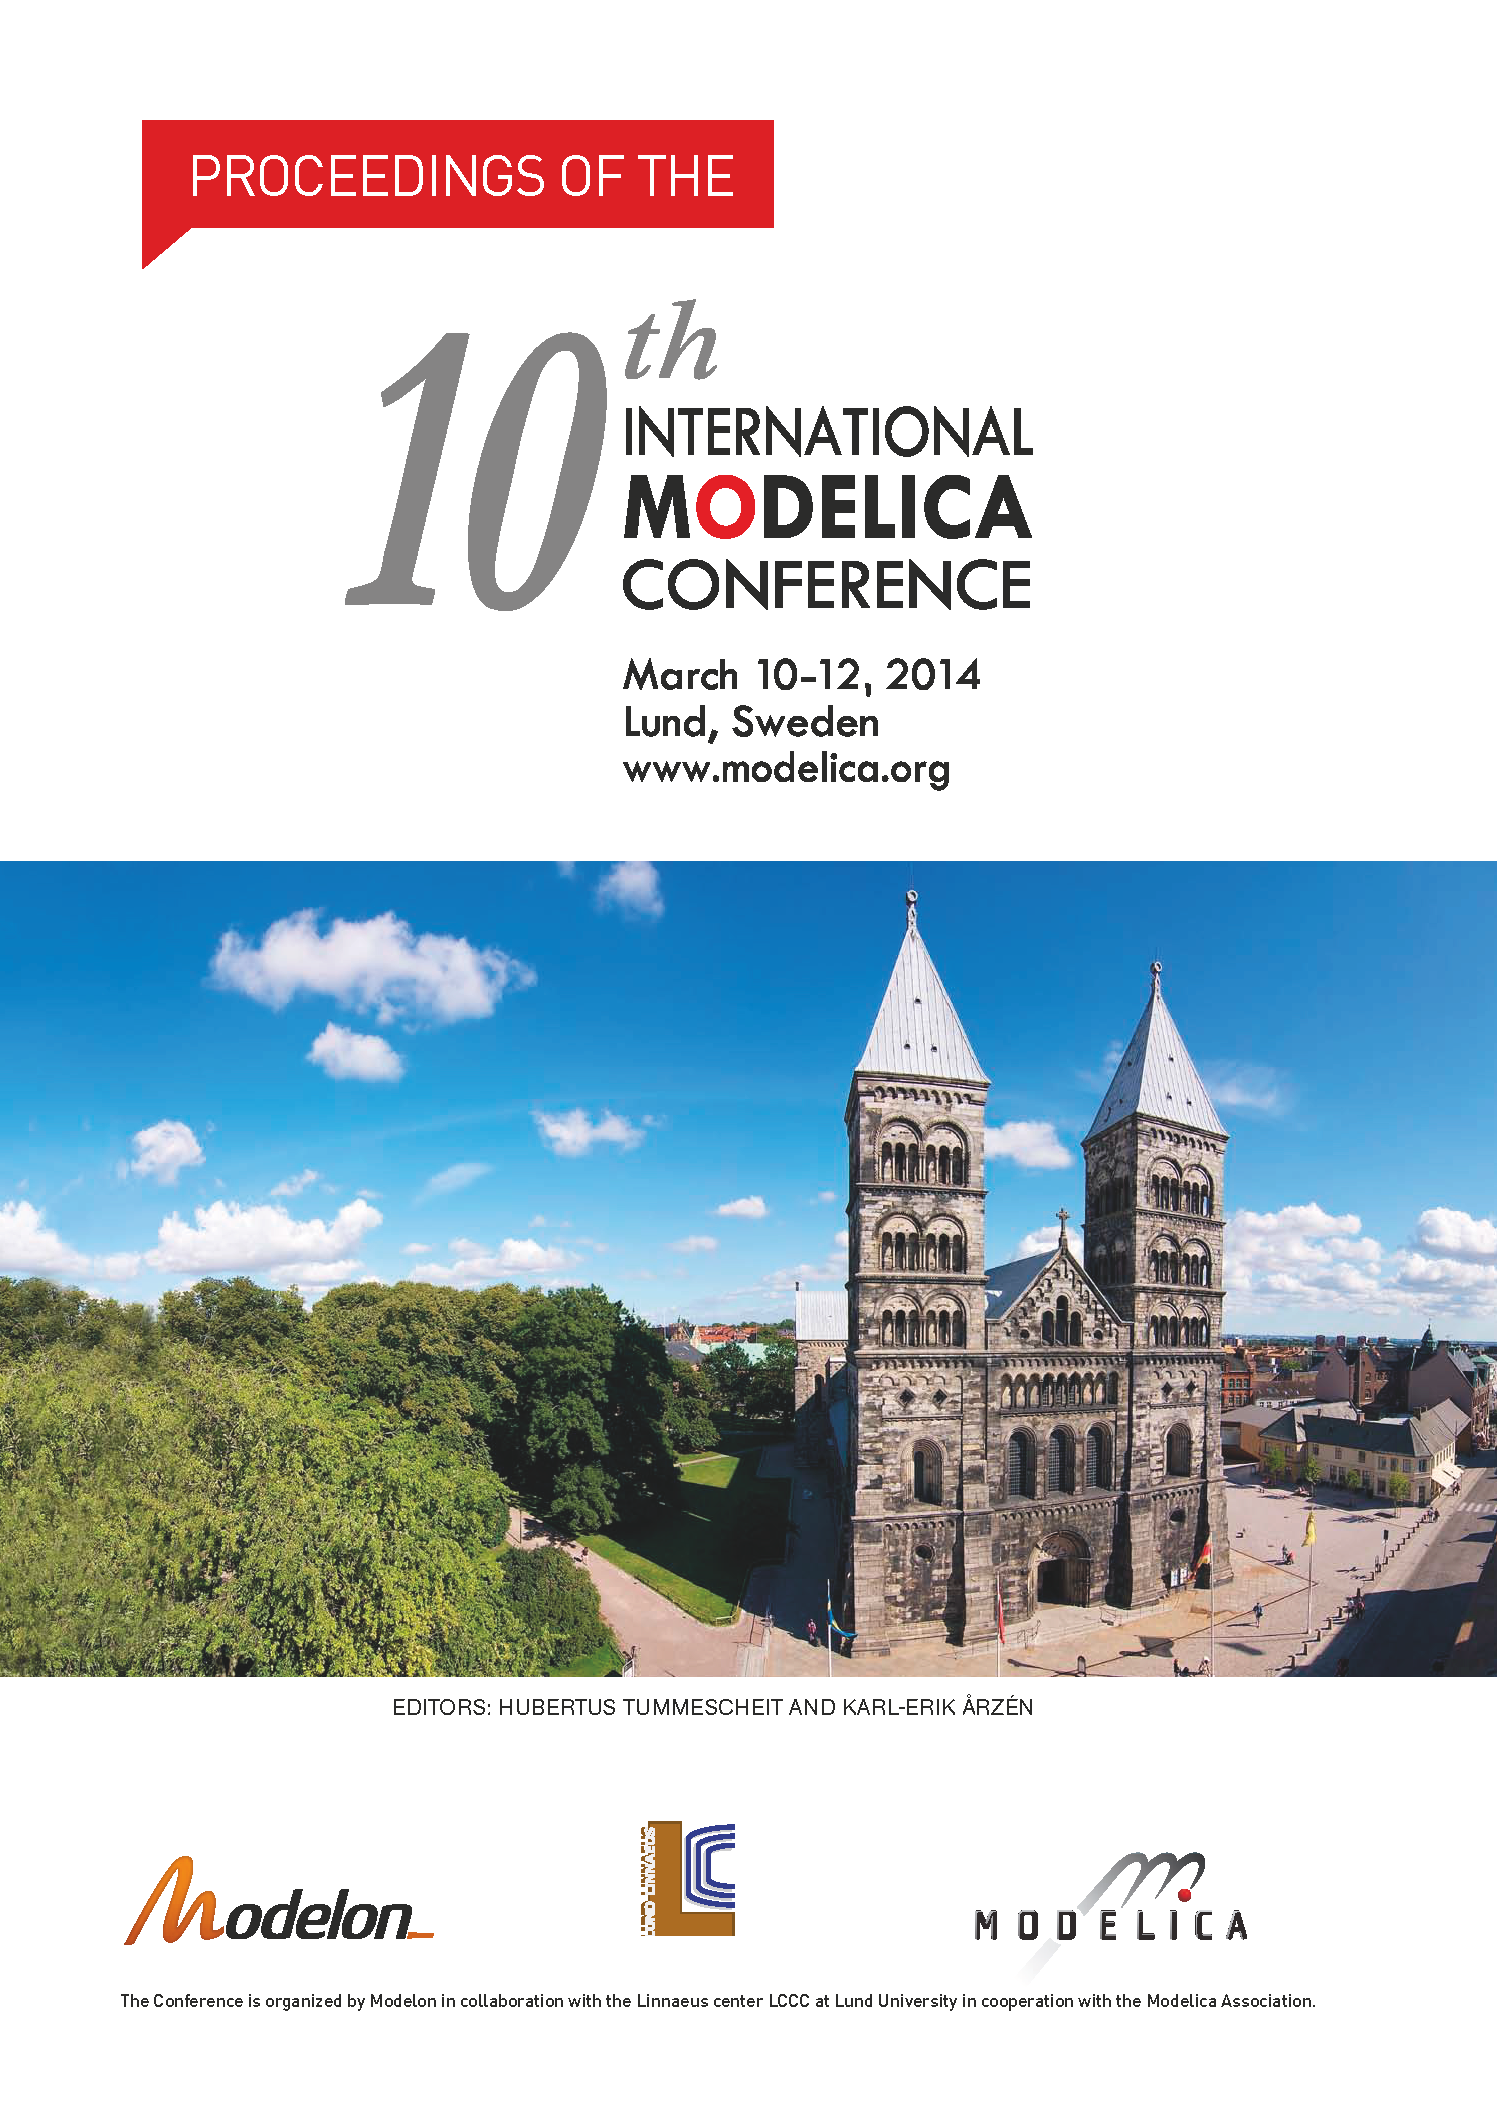 					View Proceedings of the 10th International Modelica Conference, March 10-12, 2014, Lund, Sweden
				